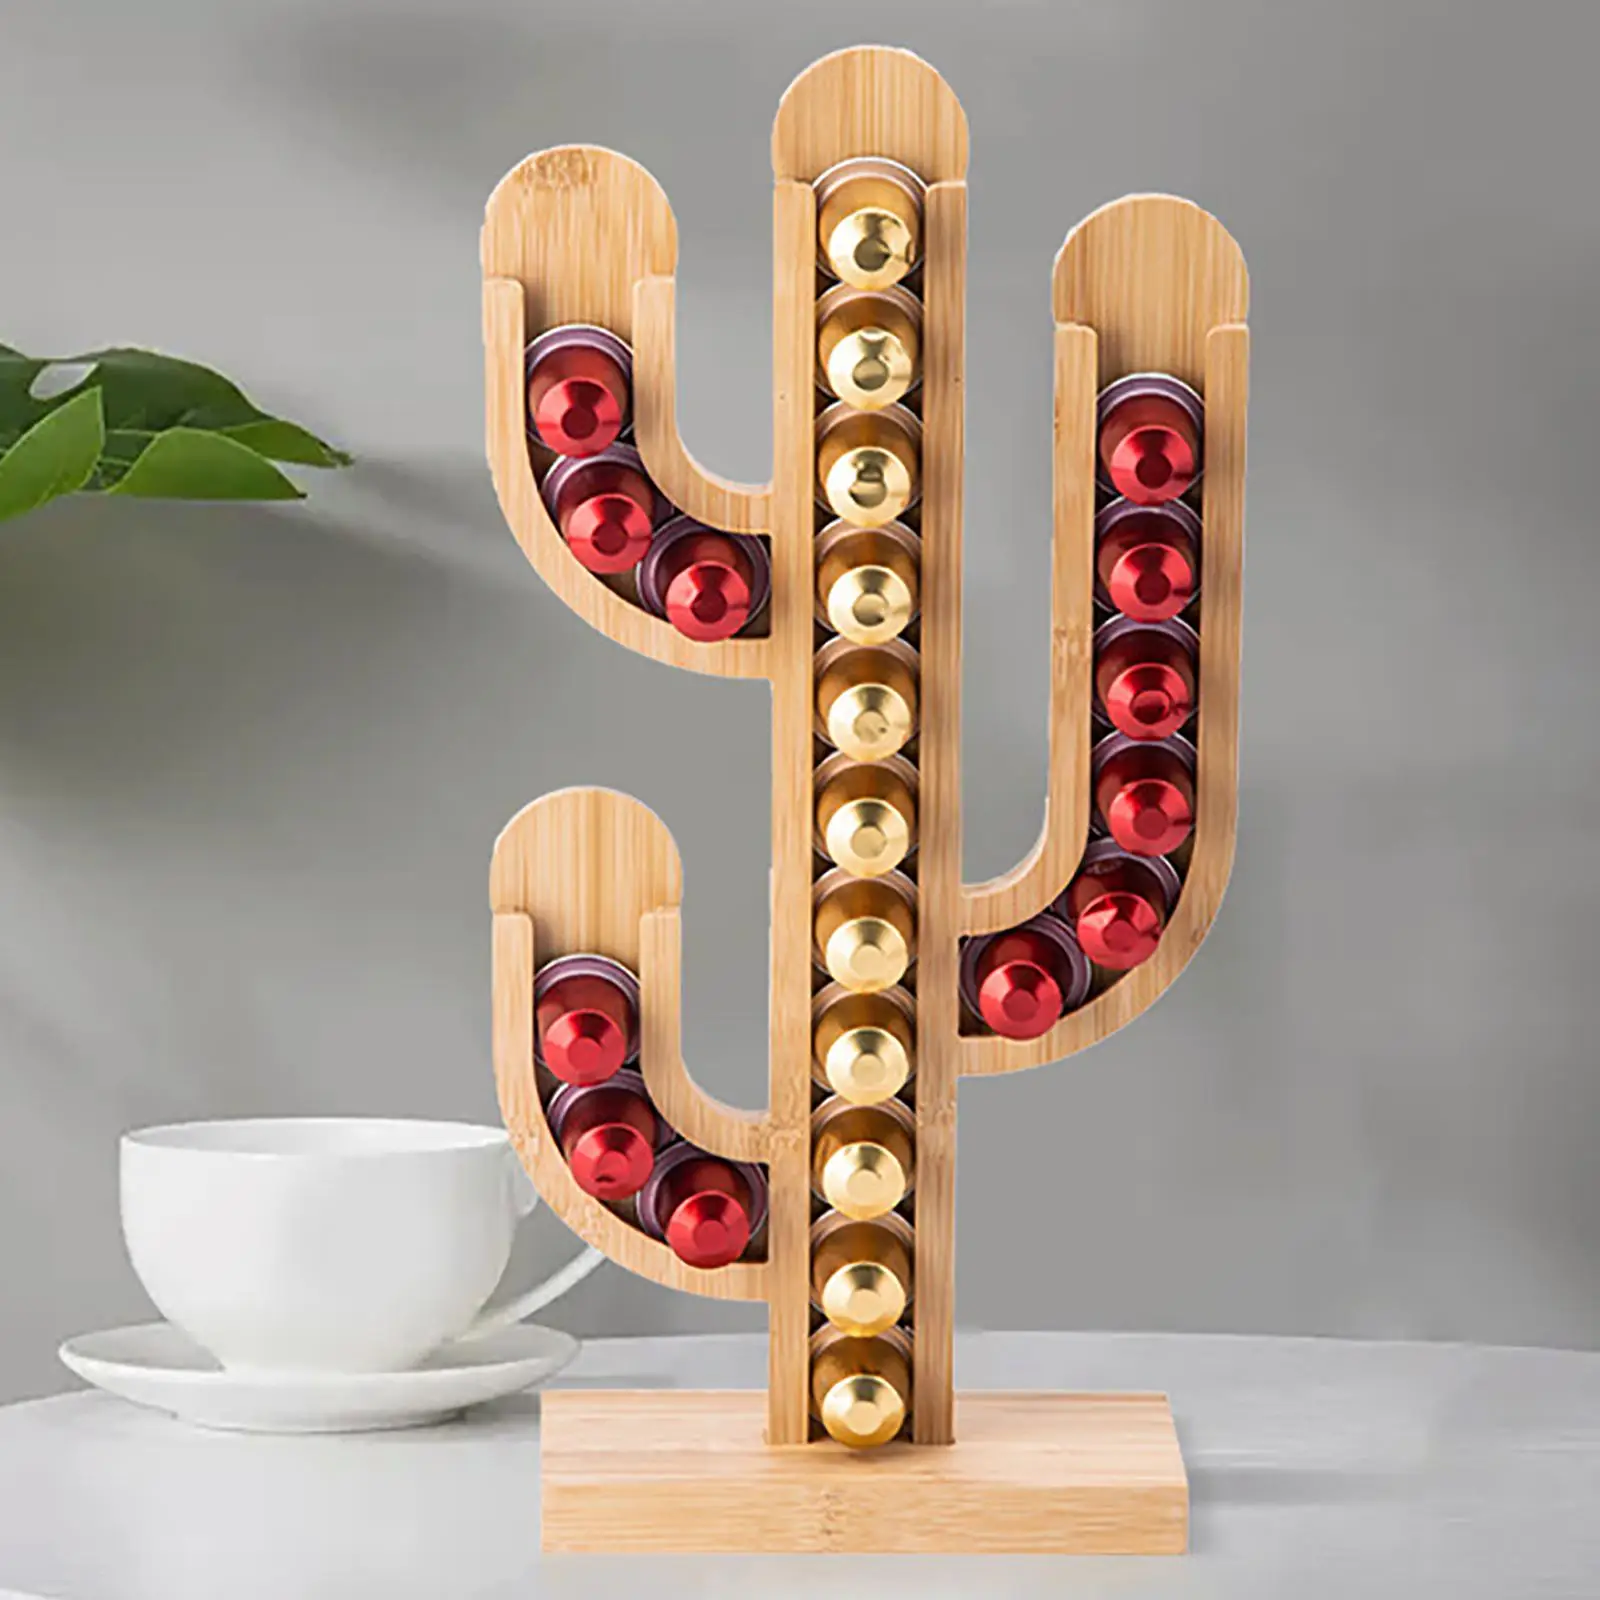 Wood Coffee Capsule Holder Cactus Shape Tower Stand Coffee Capsule Storage Dispenser Coffee Pod Holder for Home Drink Shop Hotel